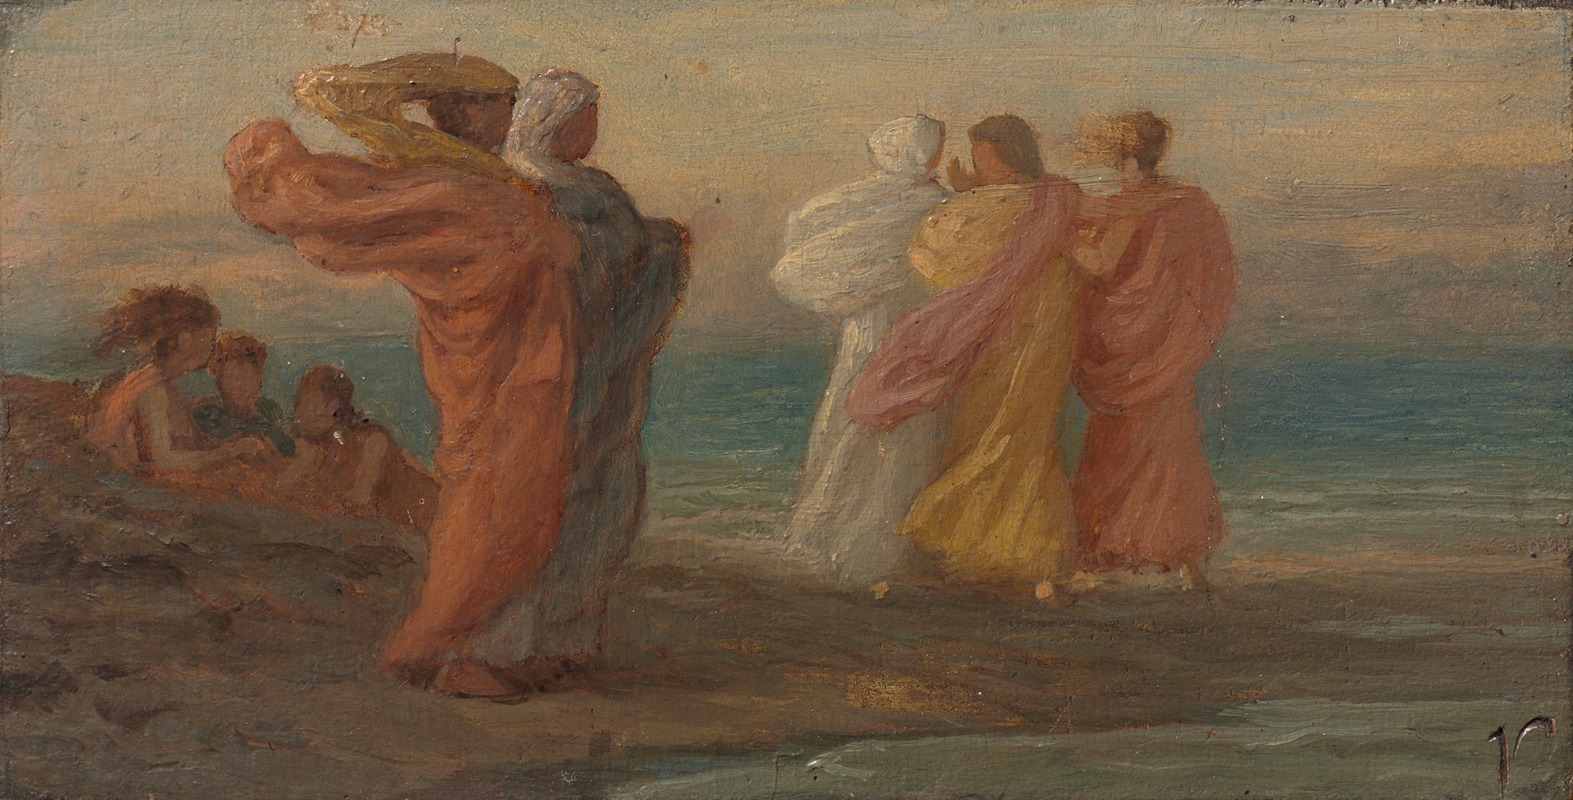 Elihu Vedder - The Music Party